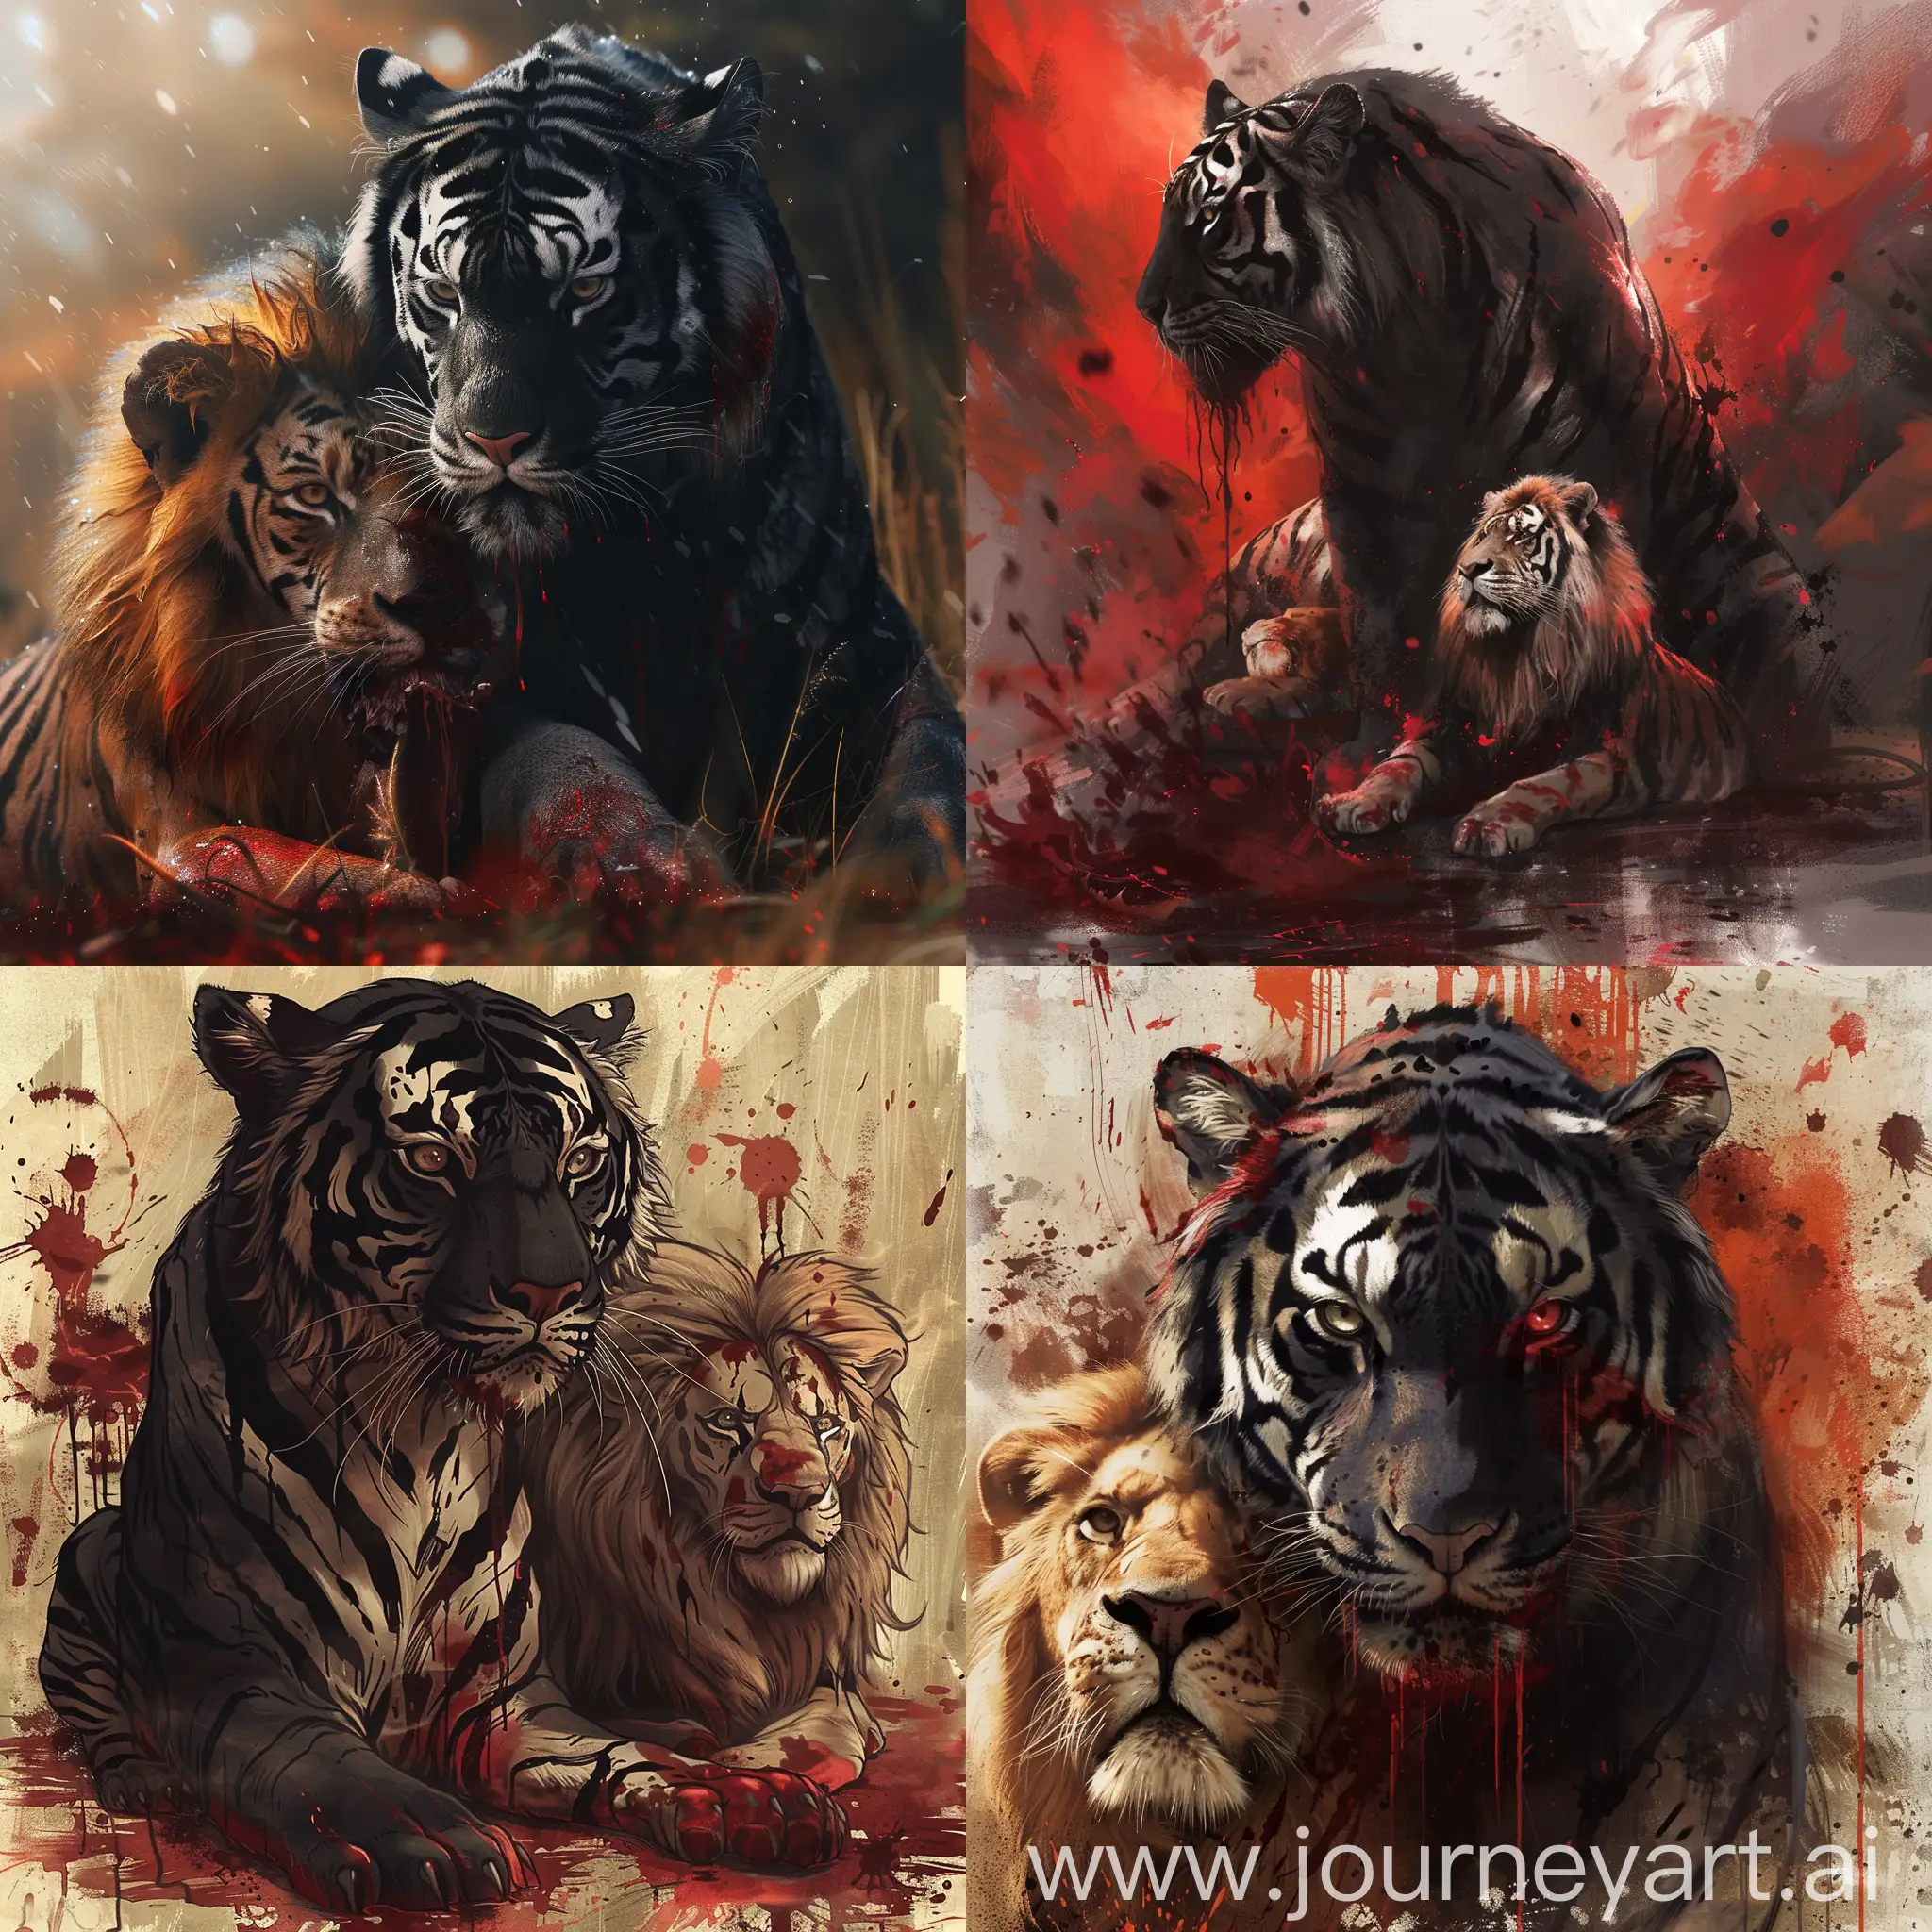 Ferocious-Black-Tiger-Facing-Off-Against-Lion-in-Bloody-Encounter